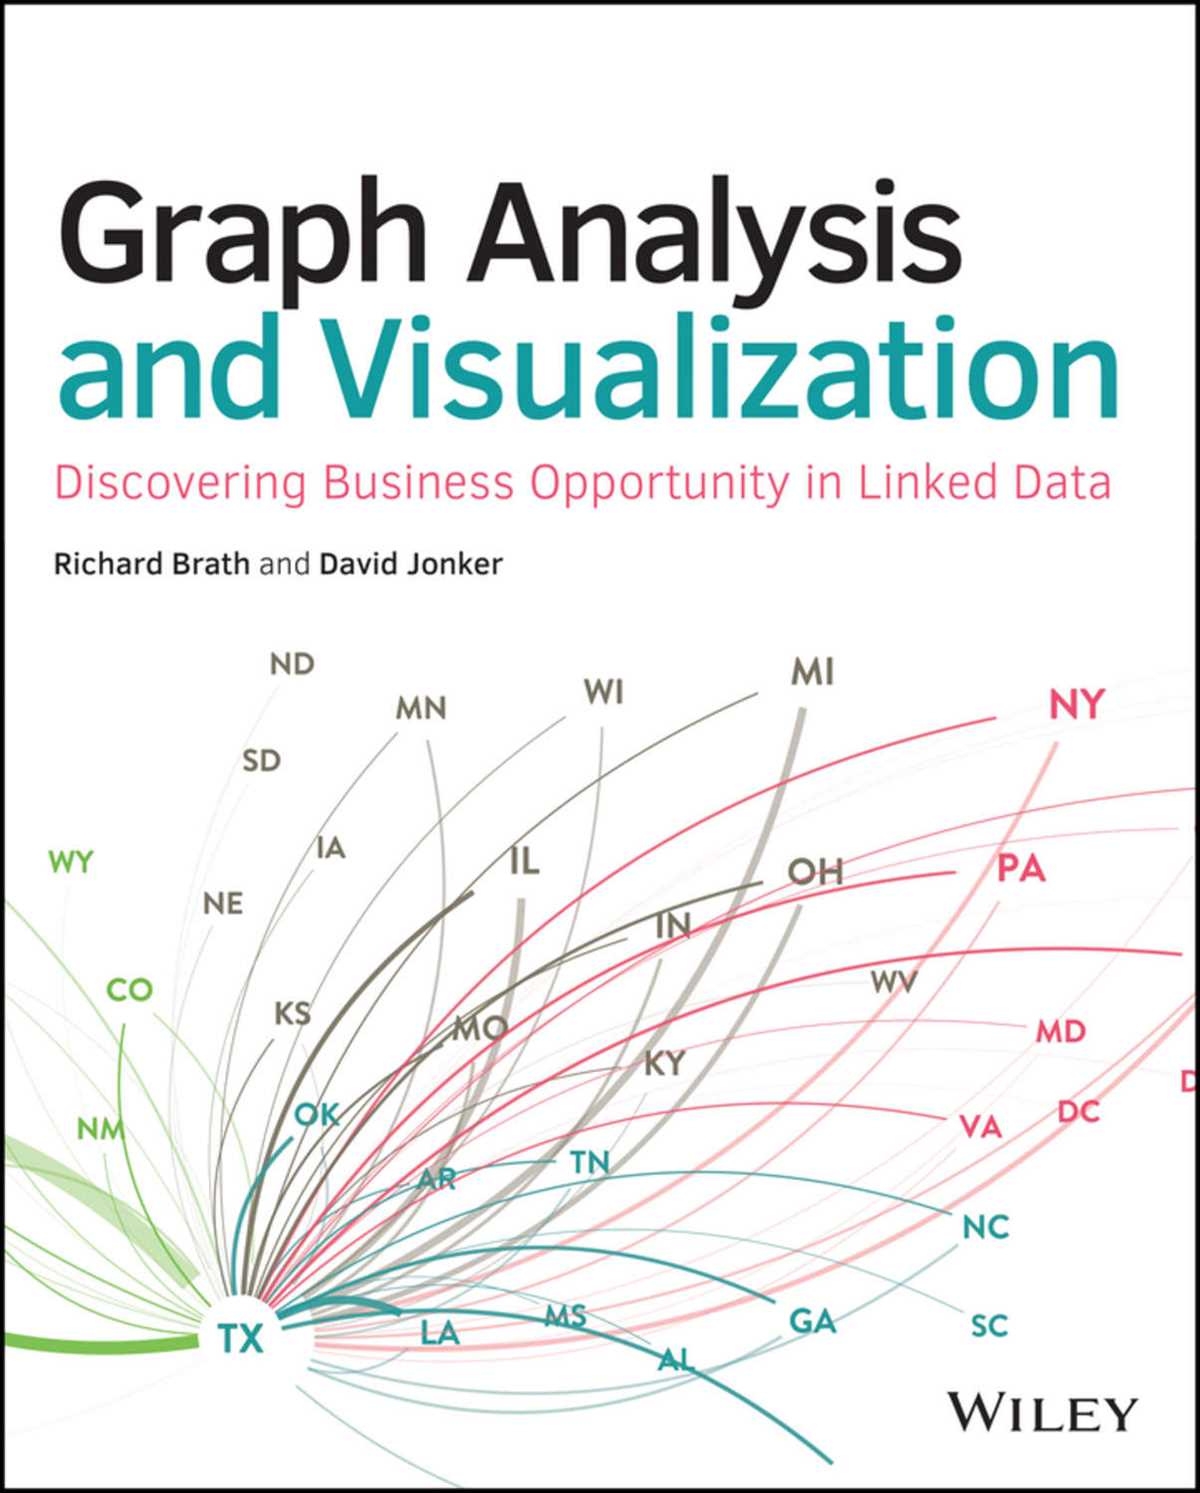 Steps for Conducting Graph Analysis